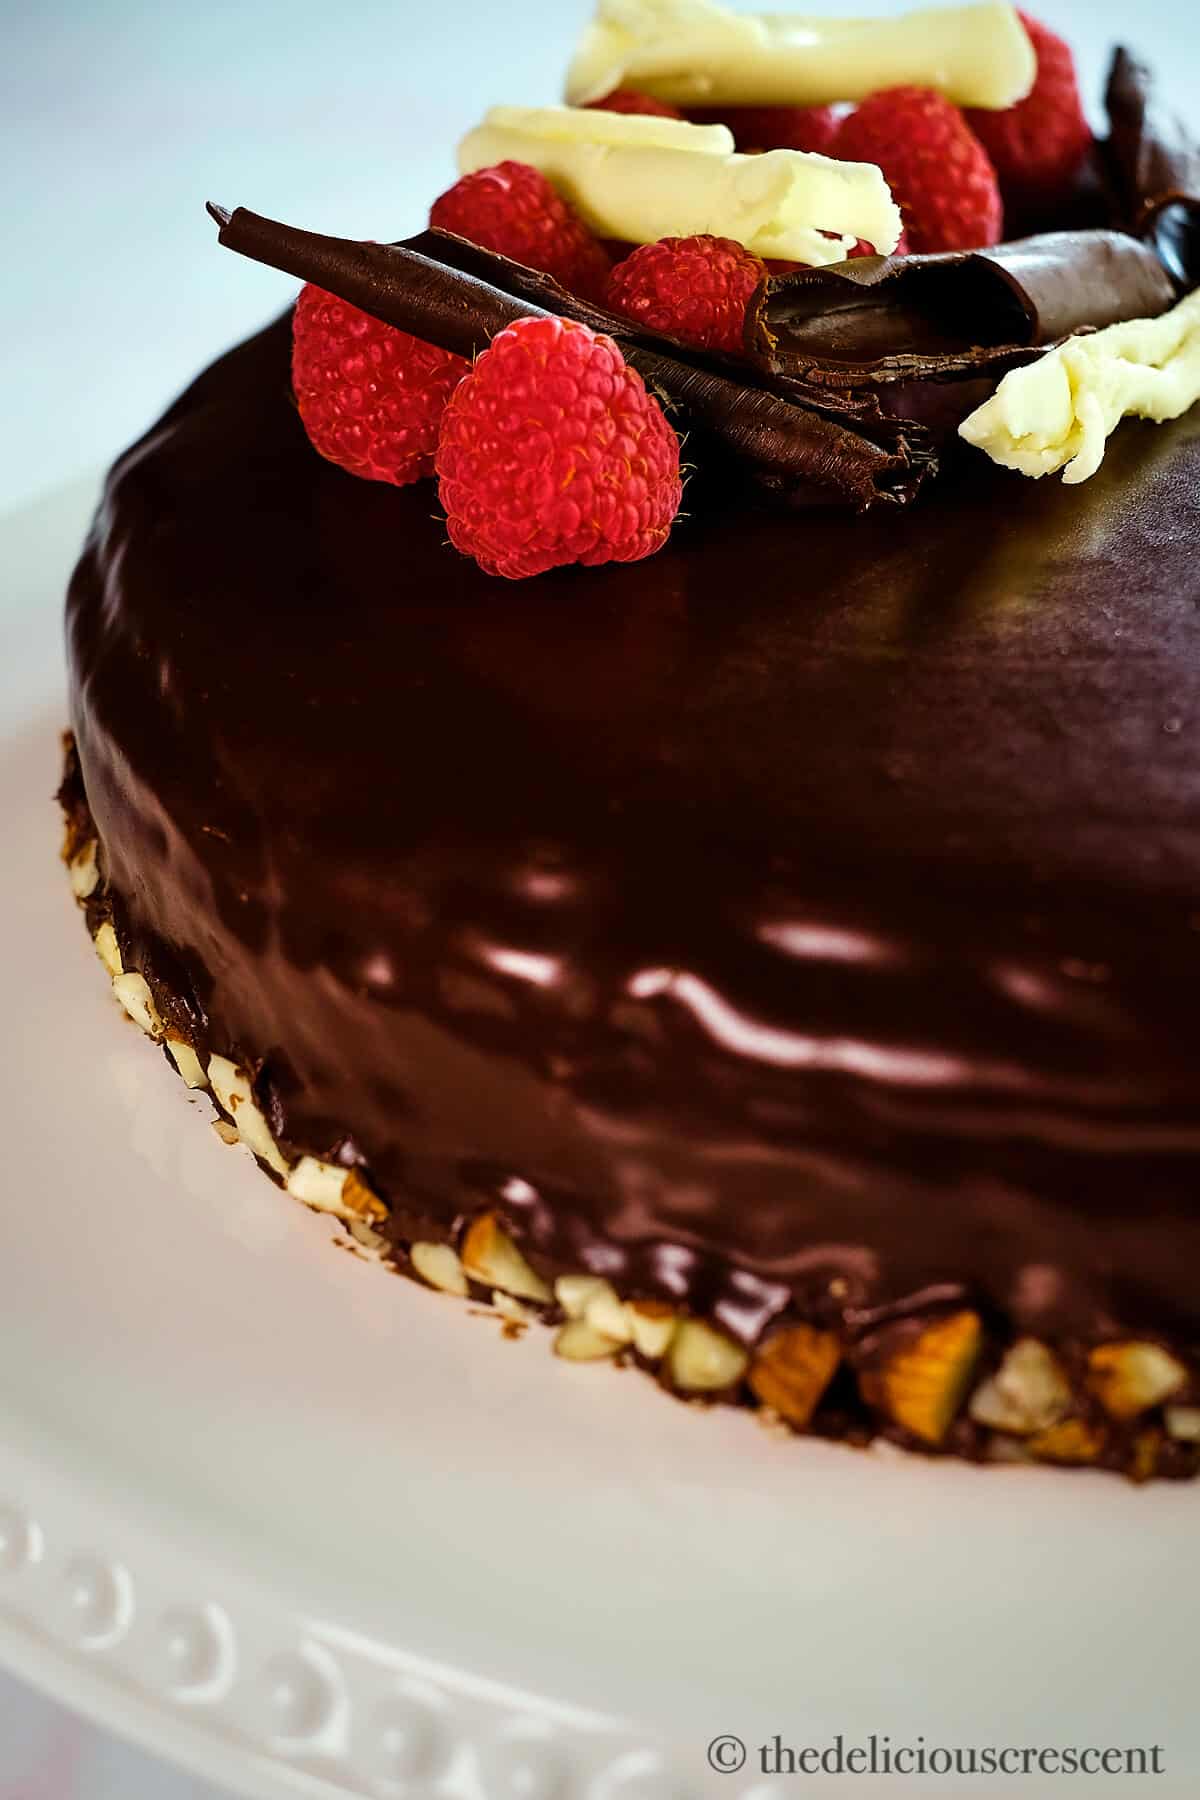 Side view of chocolate almond cake.